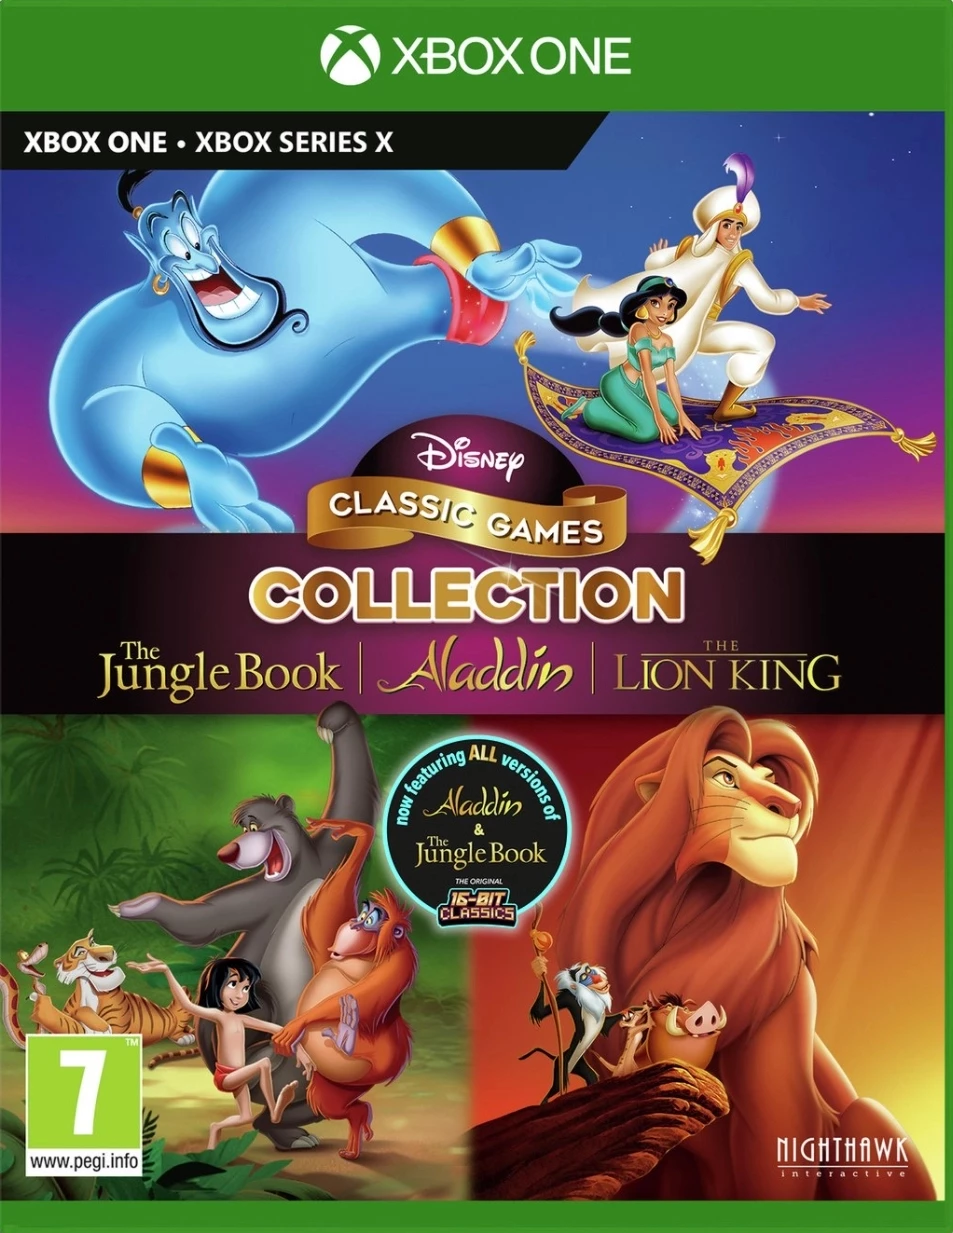 Disney Classic Games Collection: The Jungle Book, Aladdin and The Lion King (Xbox Series X), Nighthawk Interactive 